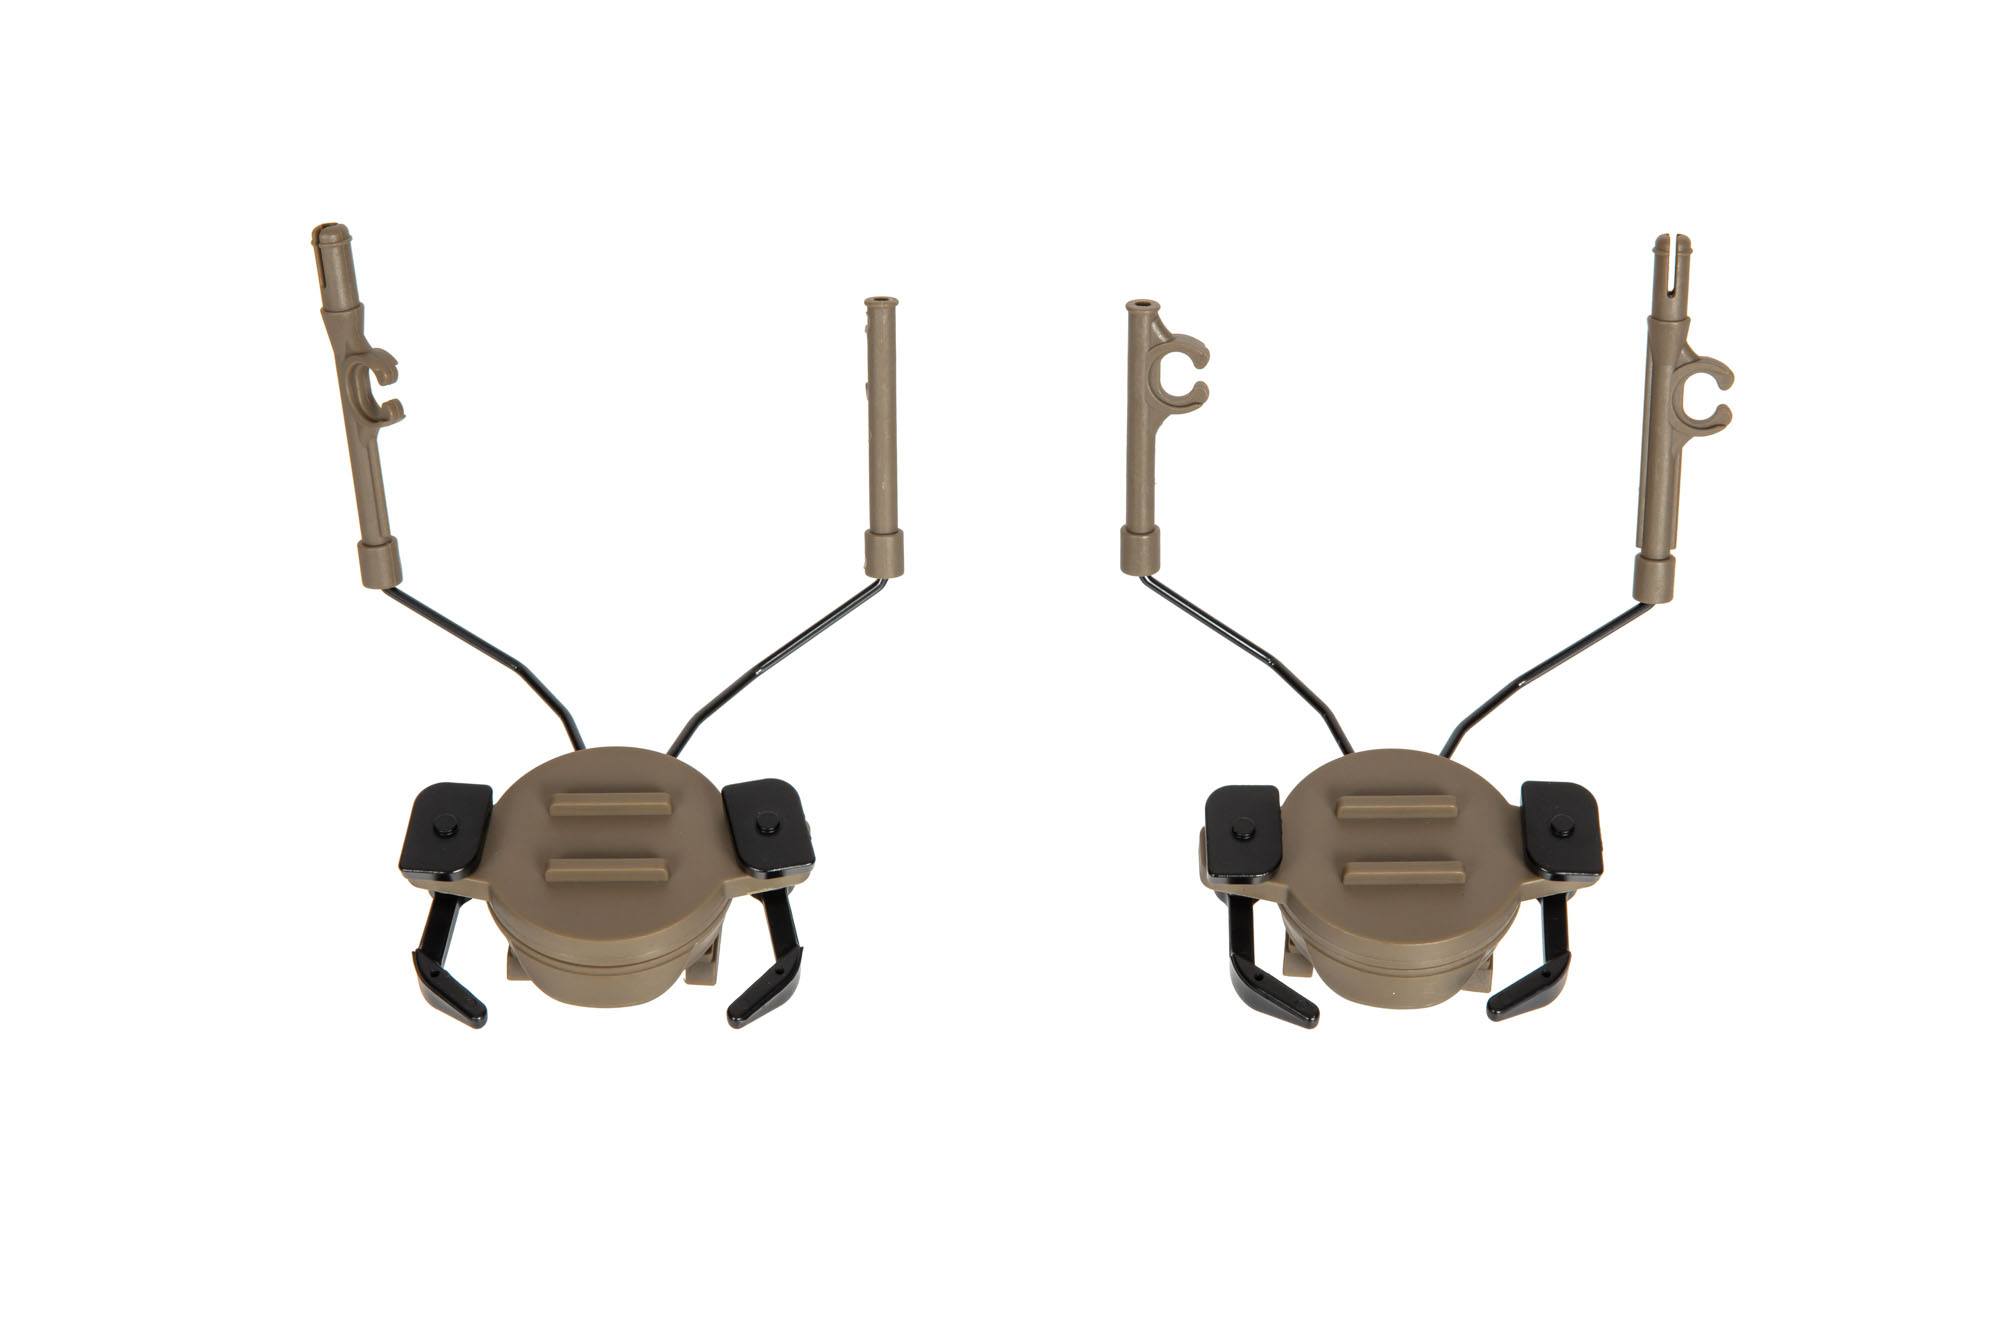 FAST / Opscore headset Bracket (19-21mm) - tan by Dragon on Airsoft Mania Europe